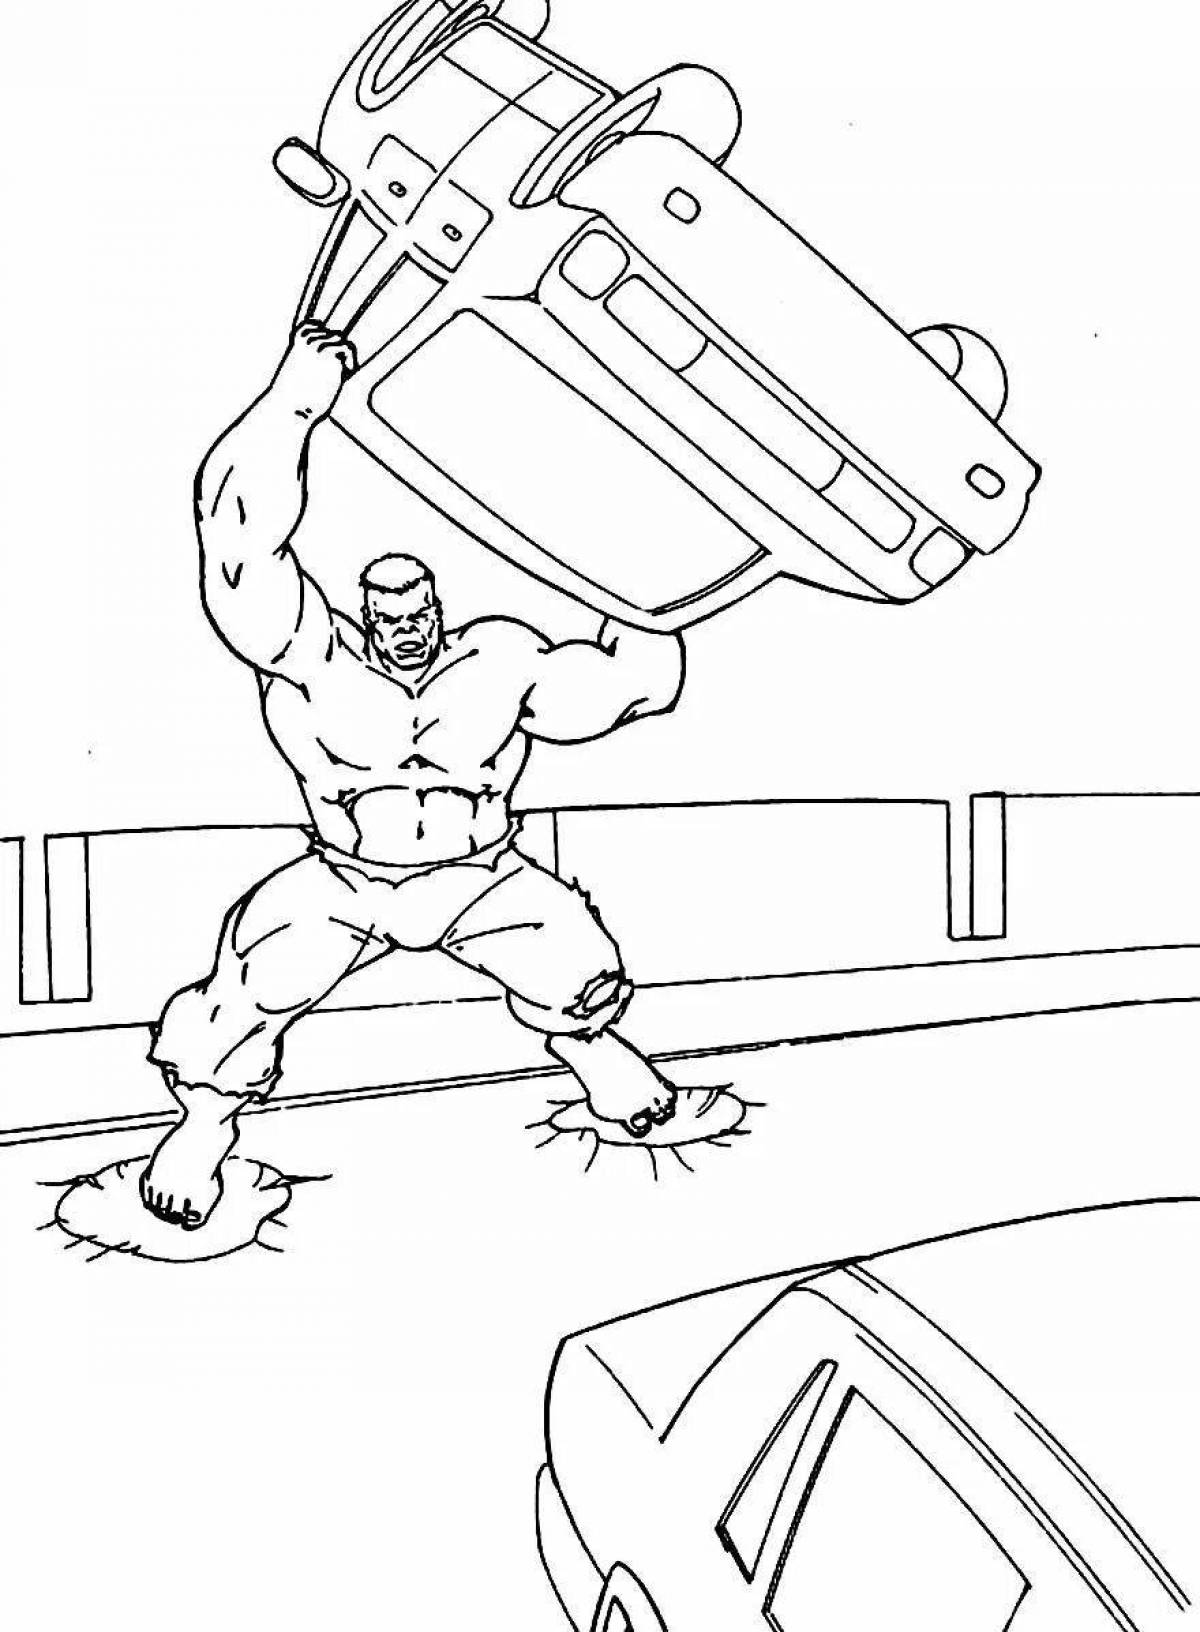 Gorgeous hulk coloring book for boys